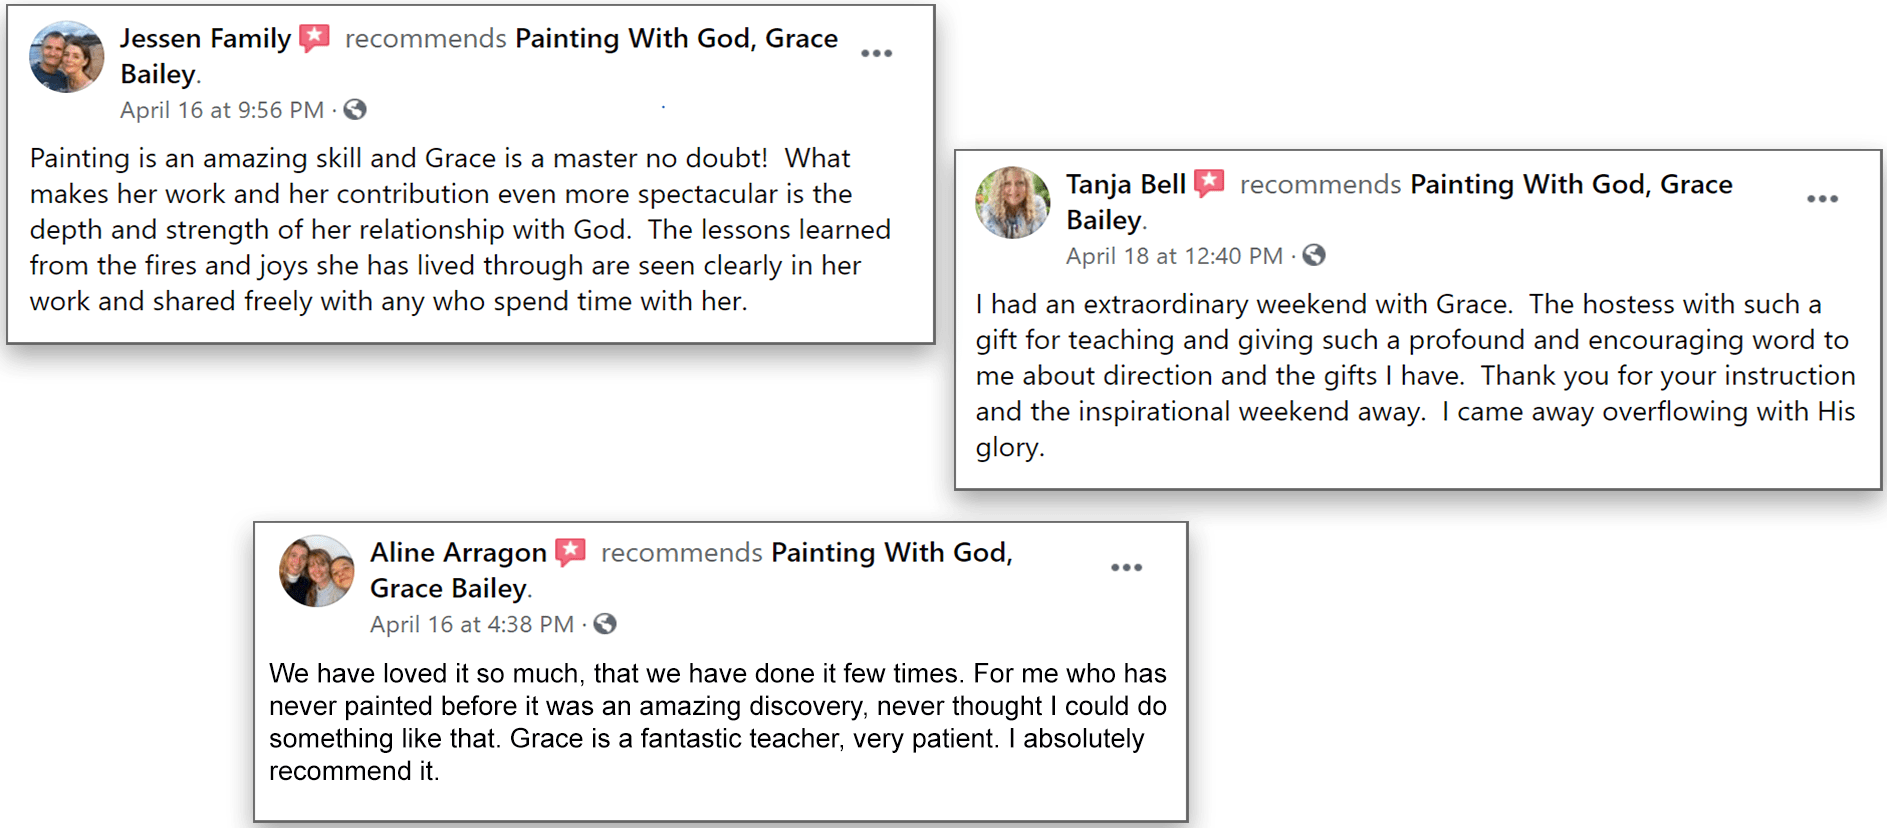 Testimonial of people about Grace Bailey, recommendations about Grace Bailey arts and prophetic painting